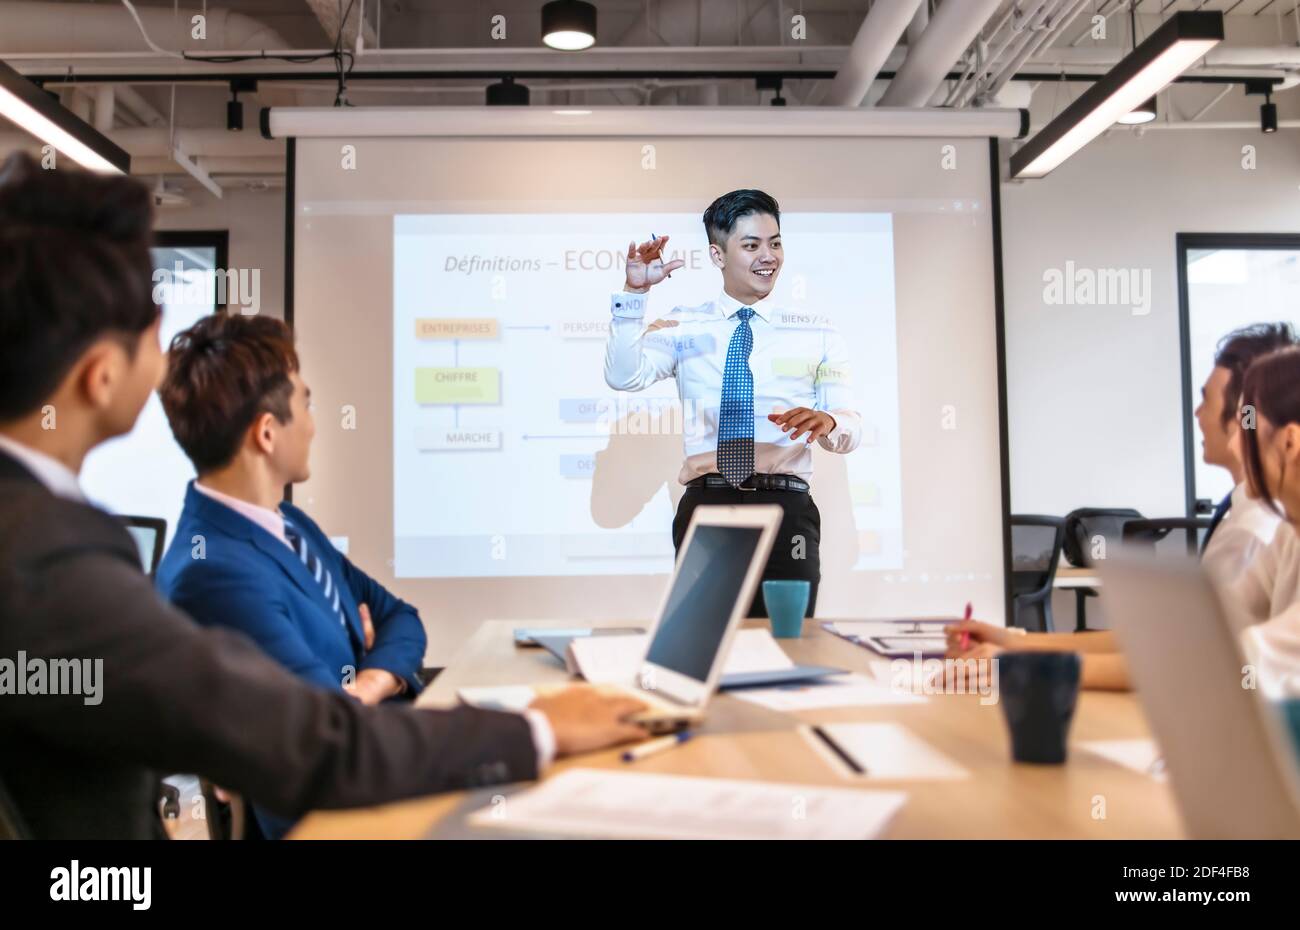 Business man making  presentation in conference room Stock Photo